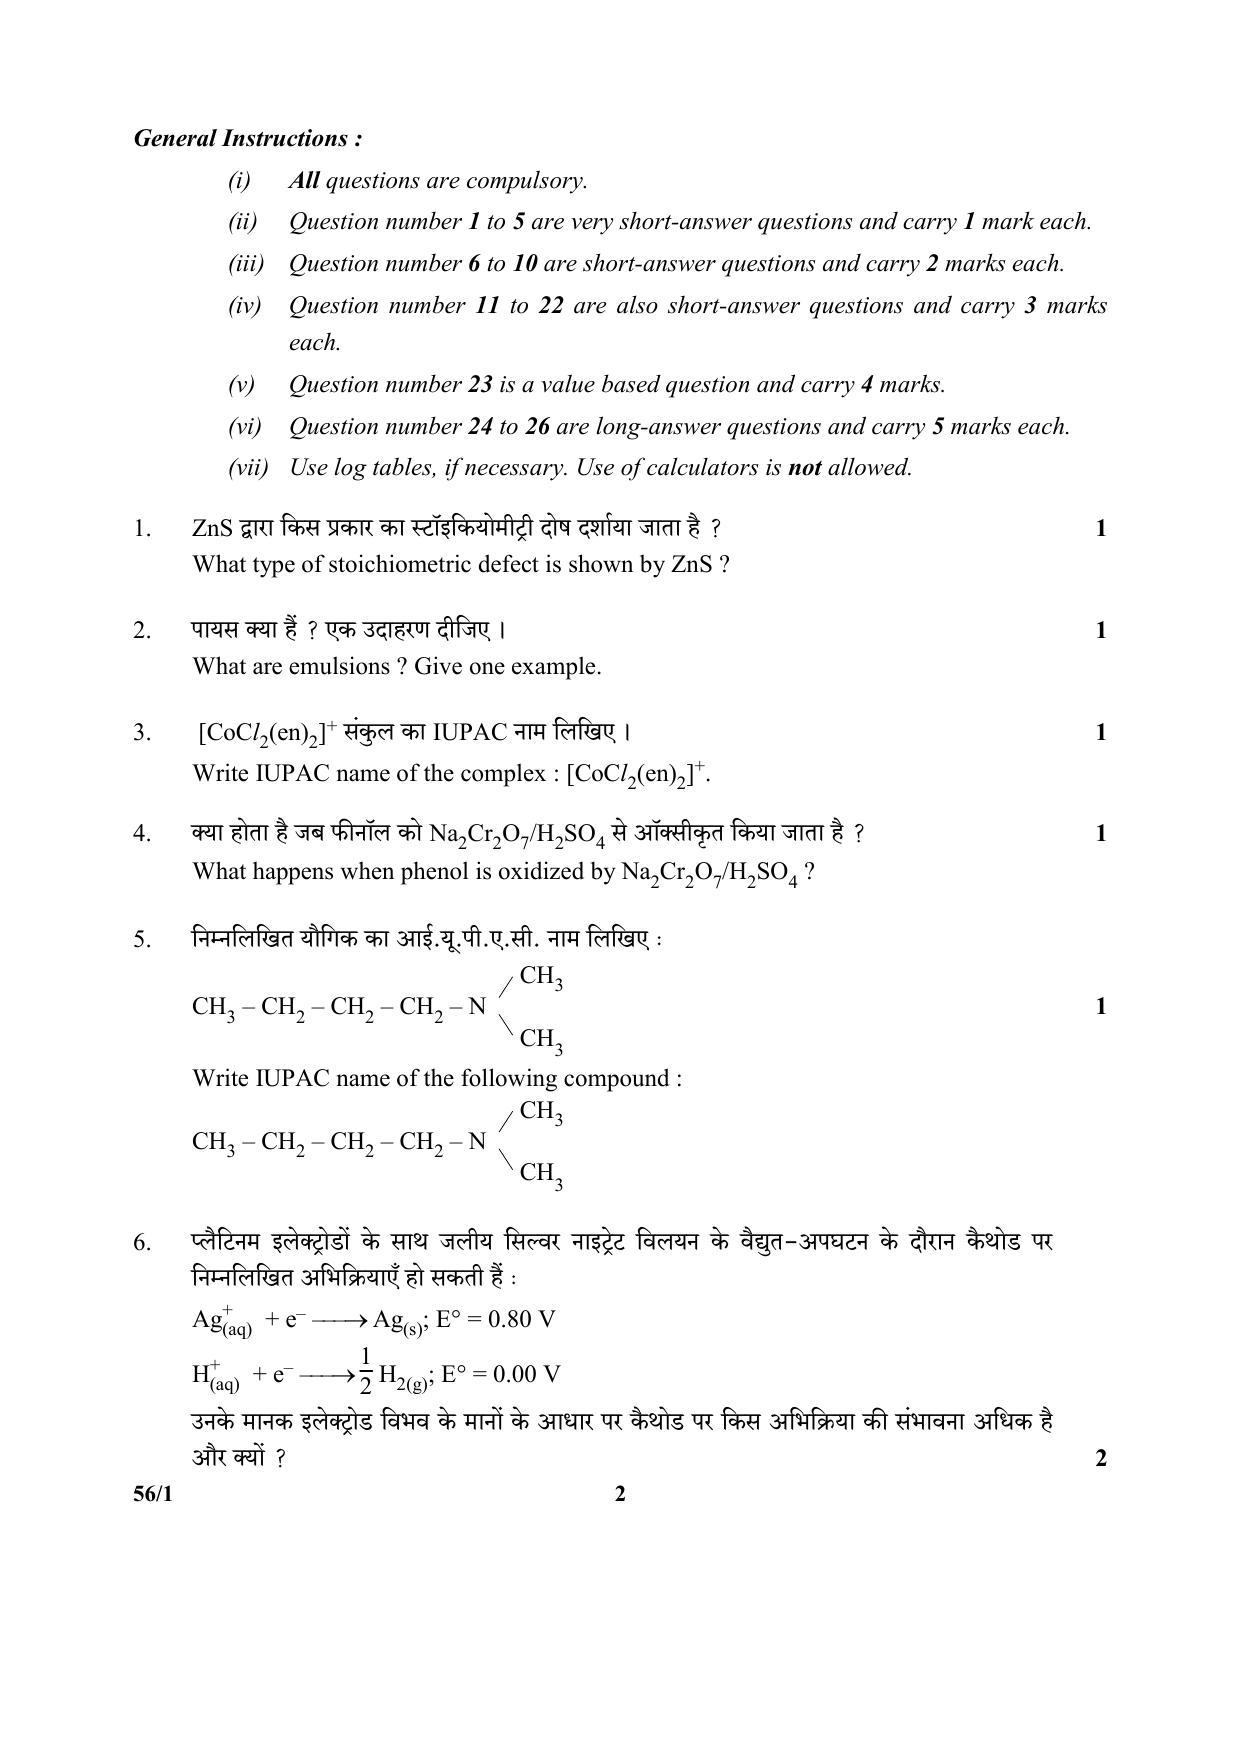 CBSE Class 12 56-1- (Chemistry) 2017-comptt Question Paper - Page 2